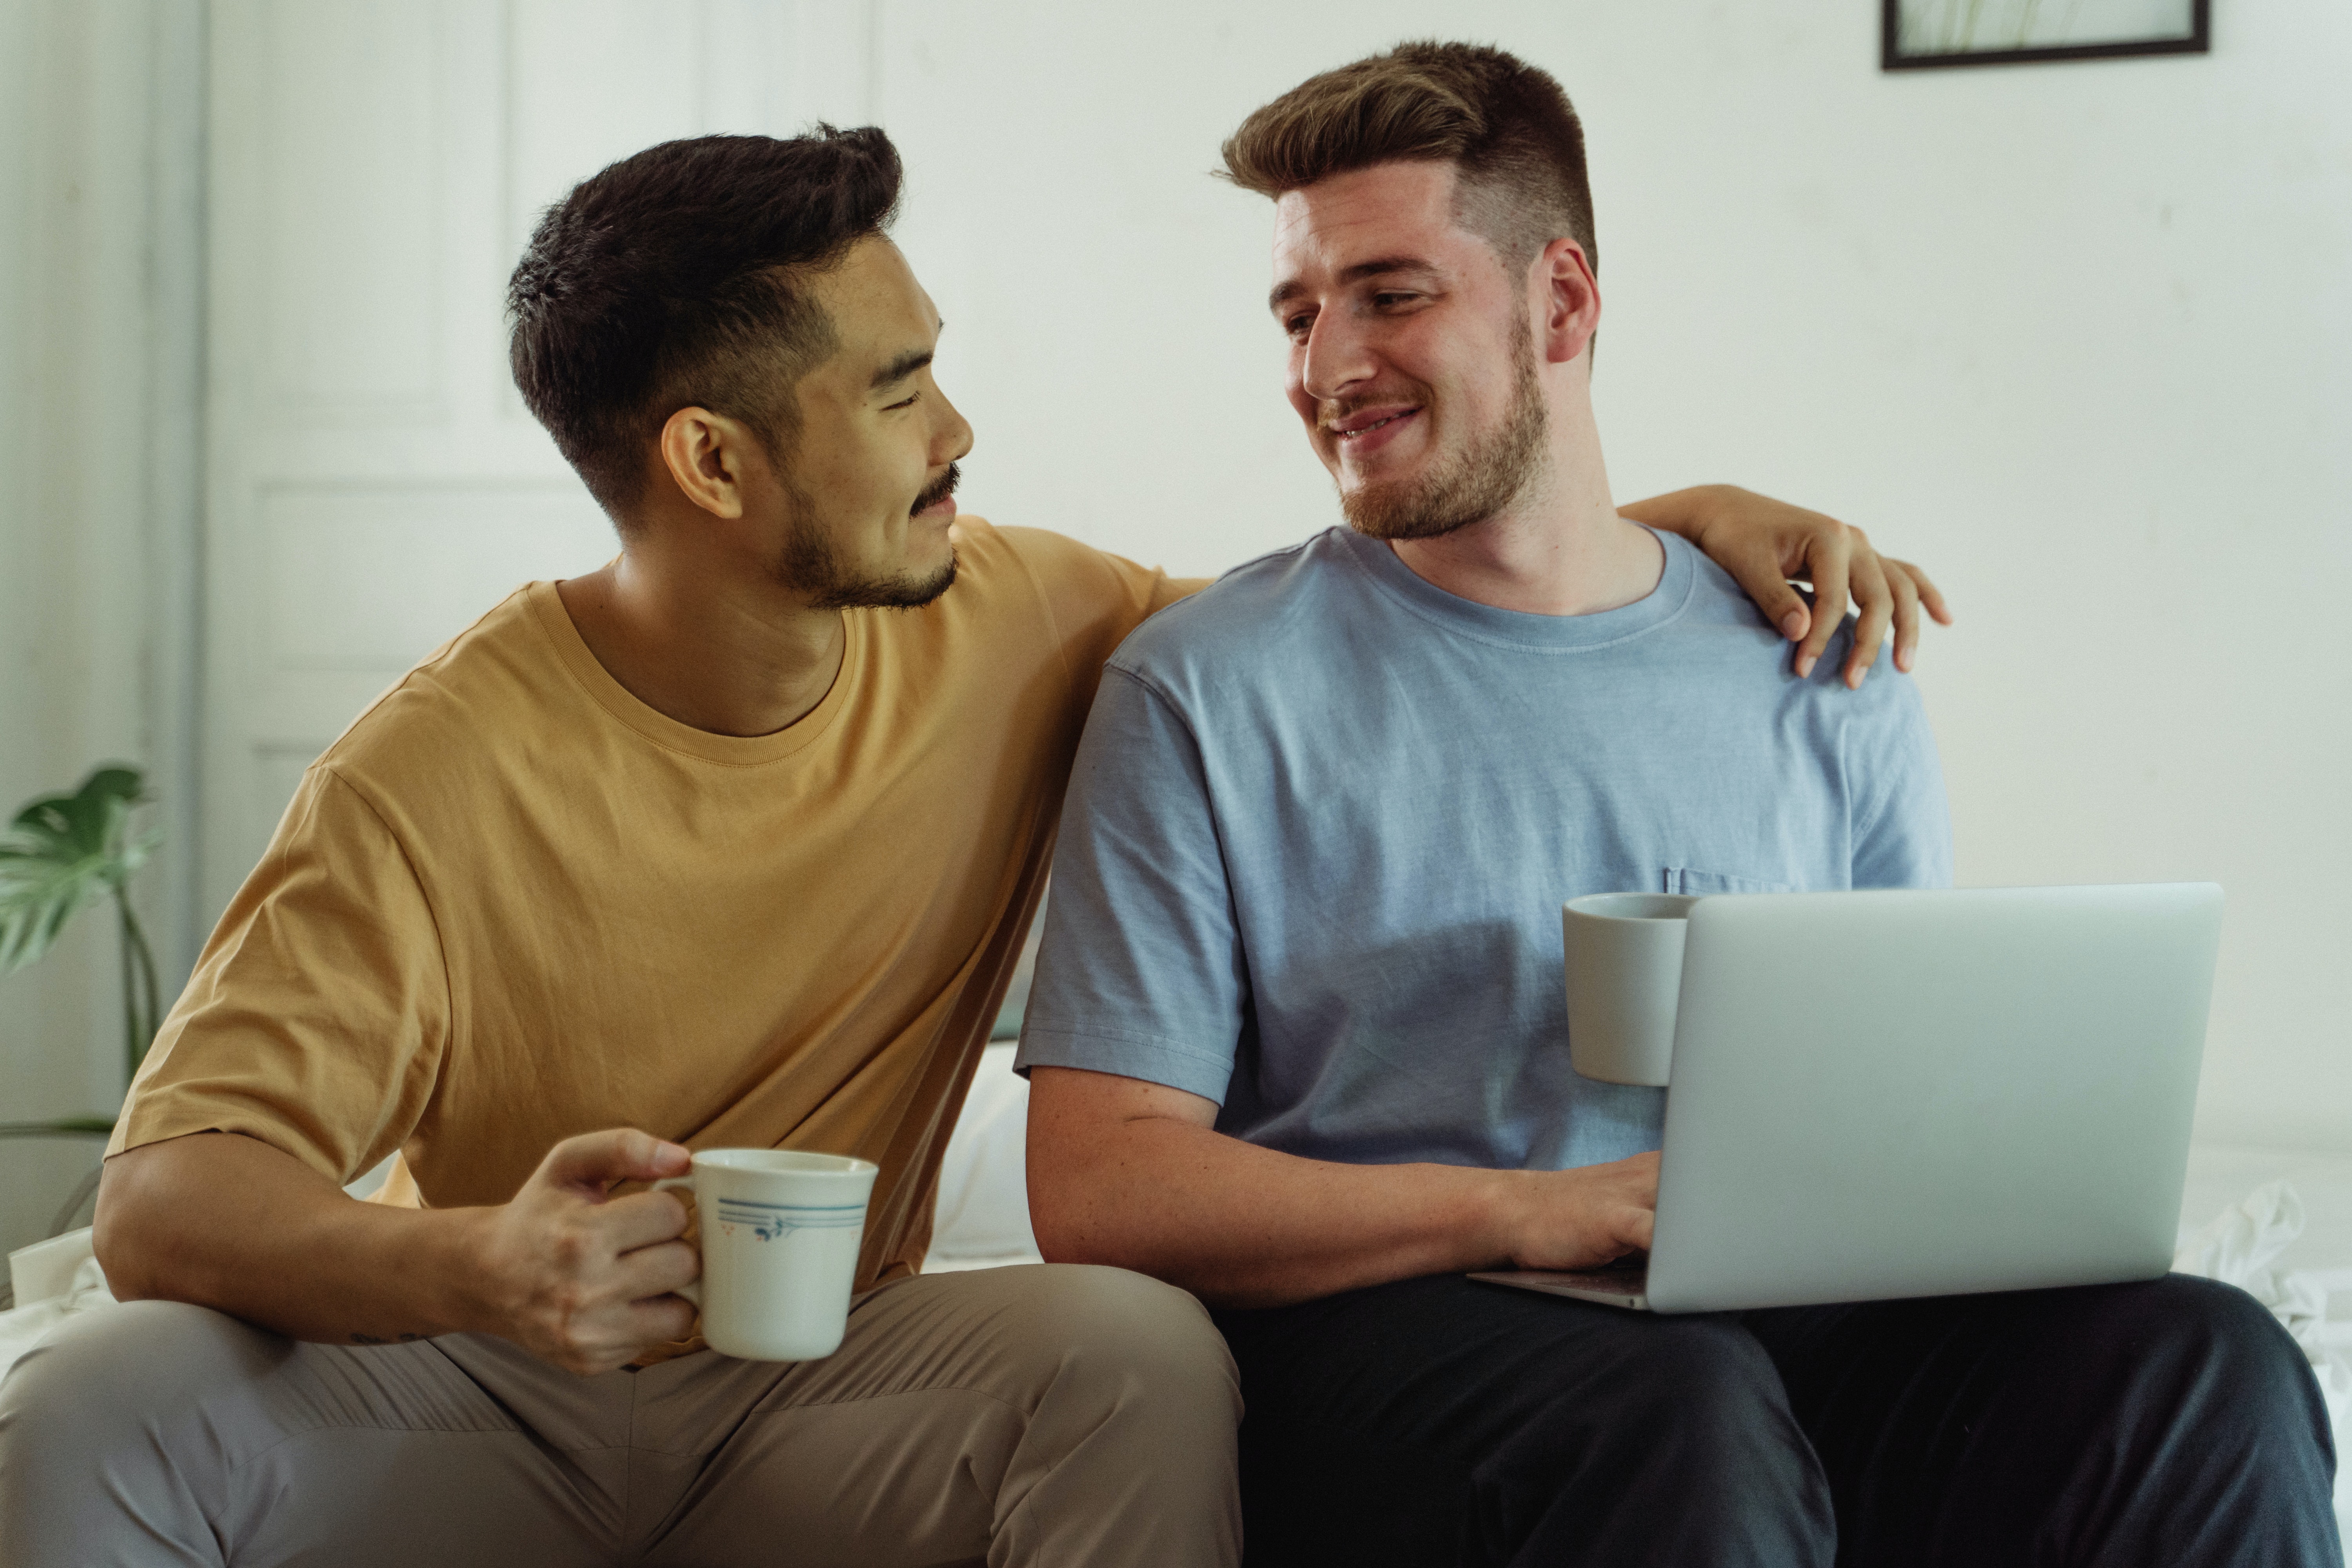 An asian and white man having an intimate moment drinking coffee and smiling to eachother.